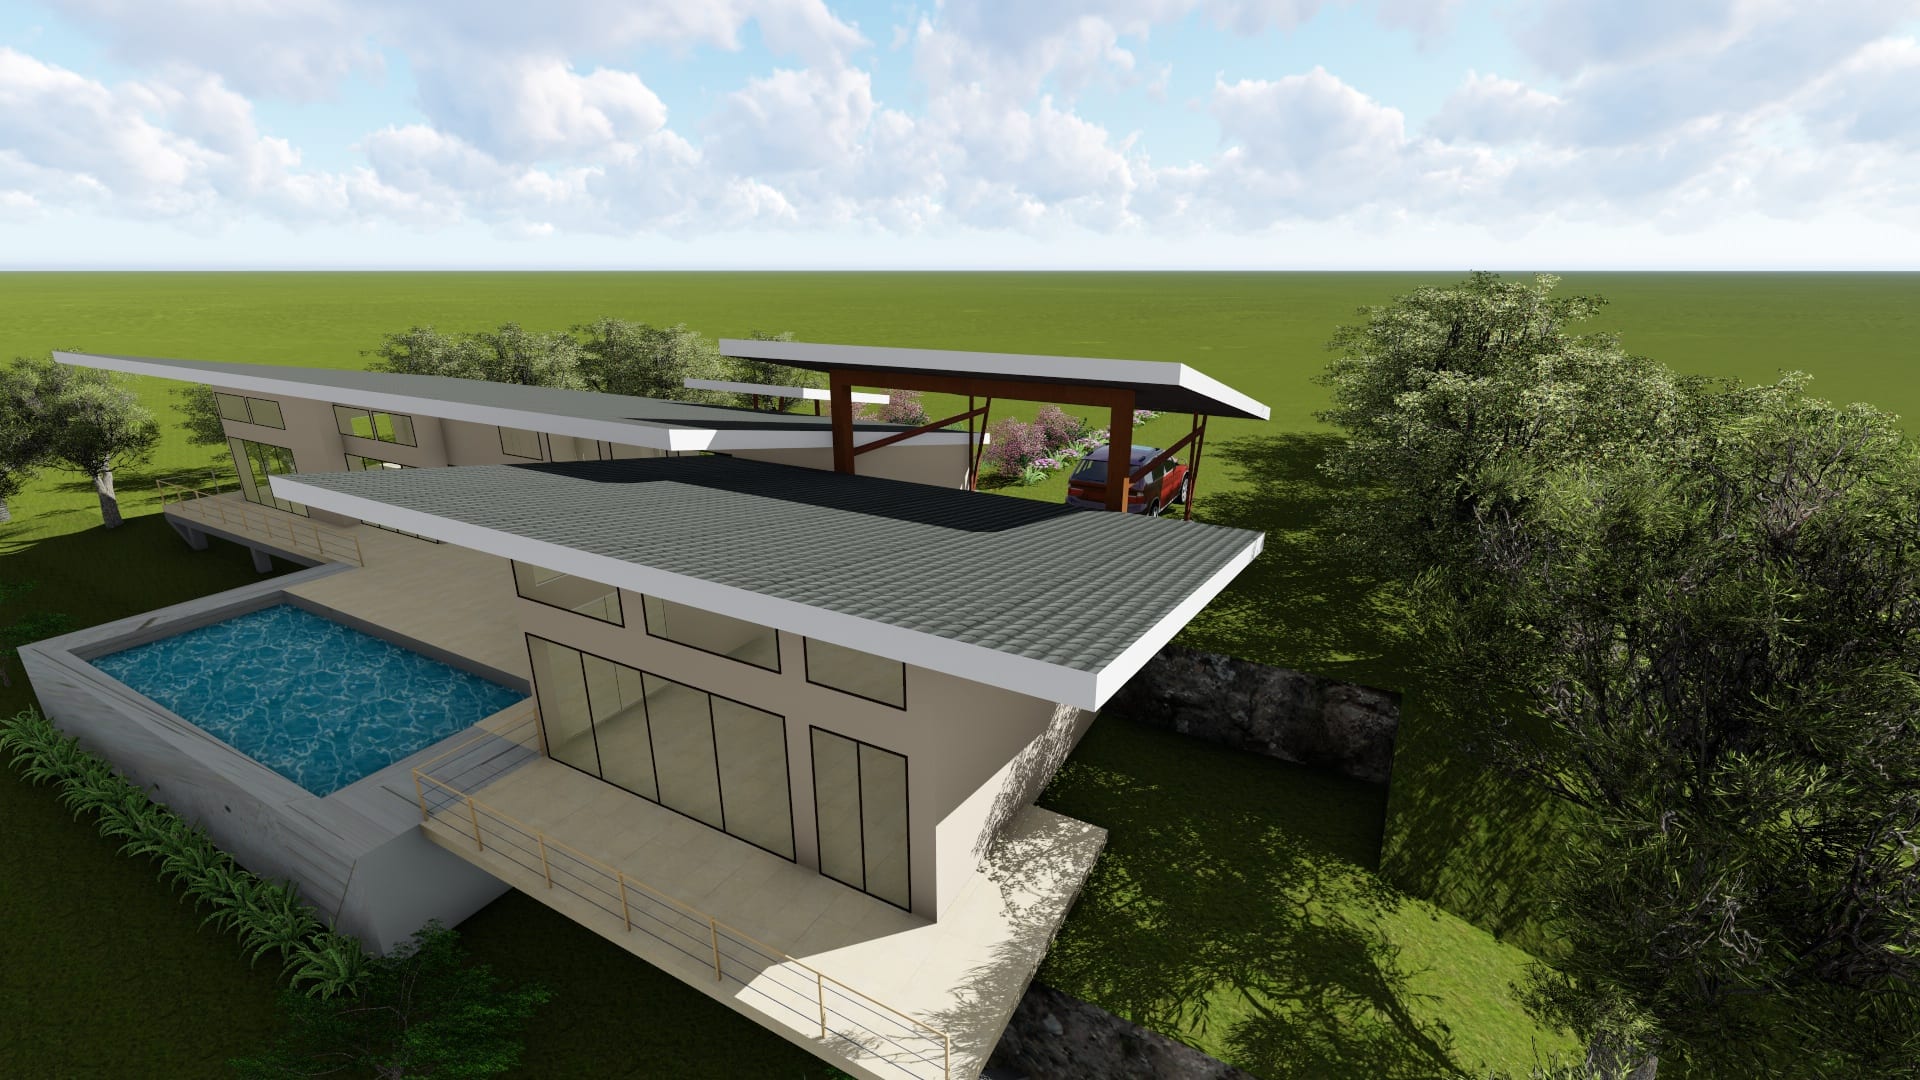 3.8 ACRES - 3 Bedroom Modern Tropical Home With Infinity Pool And Amazing Sunset Ocean Views!!!